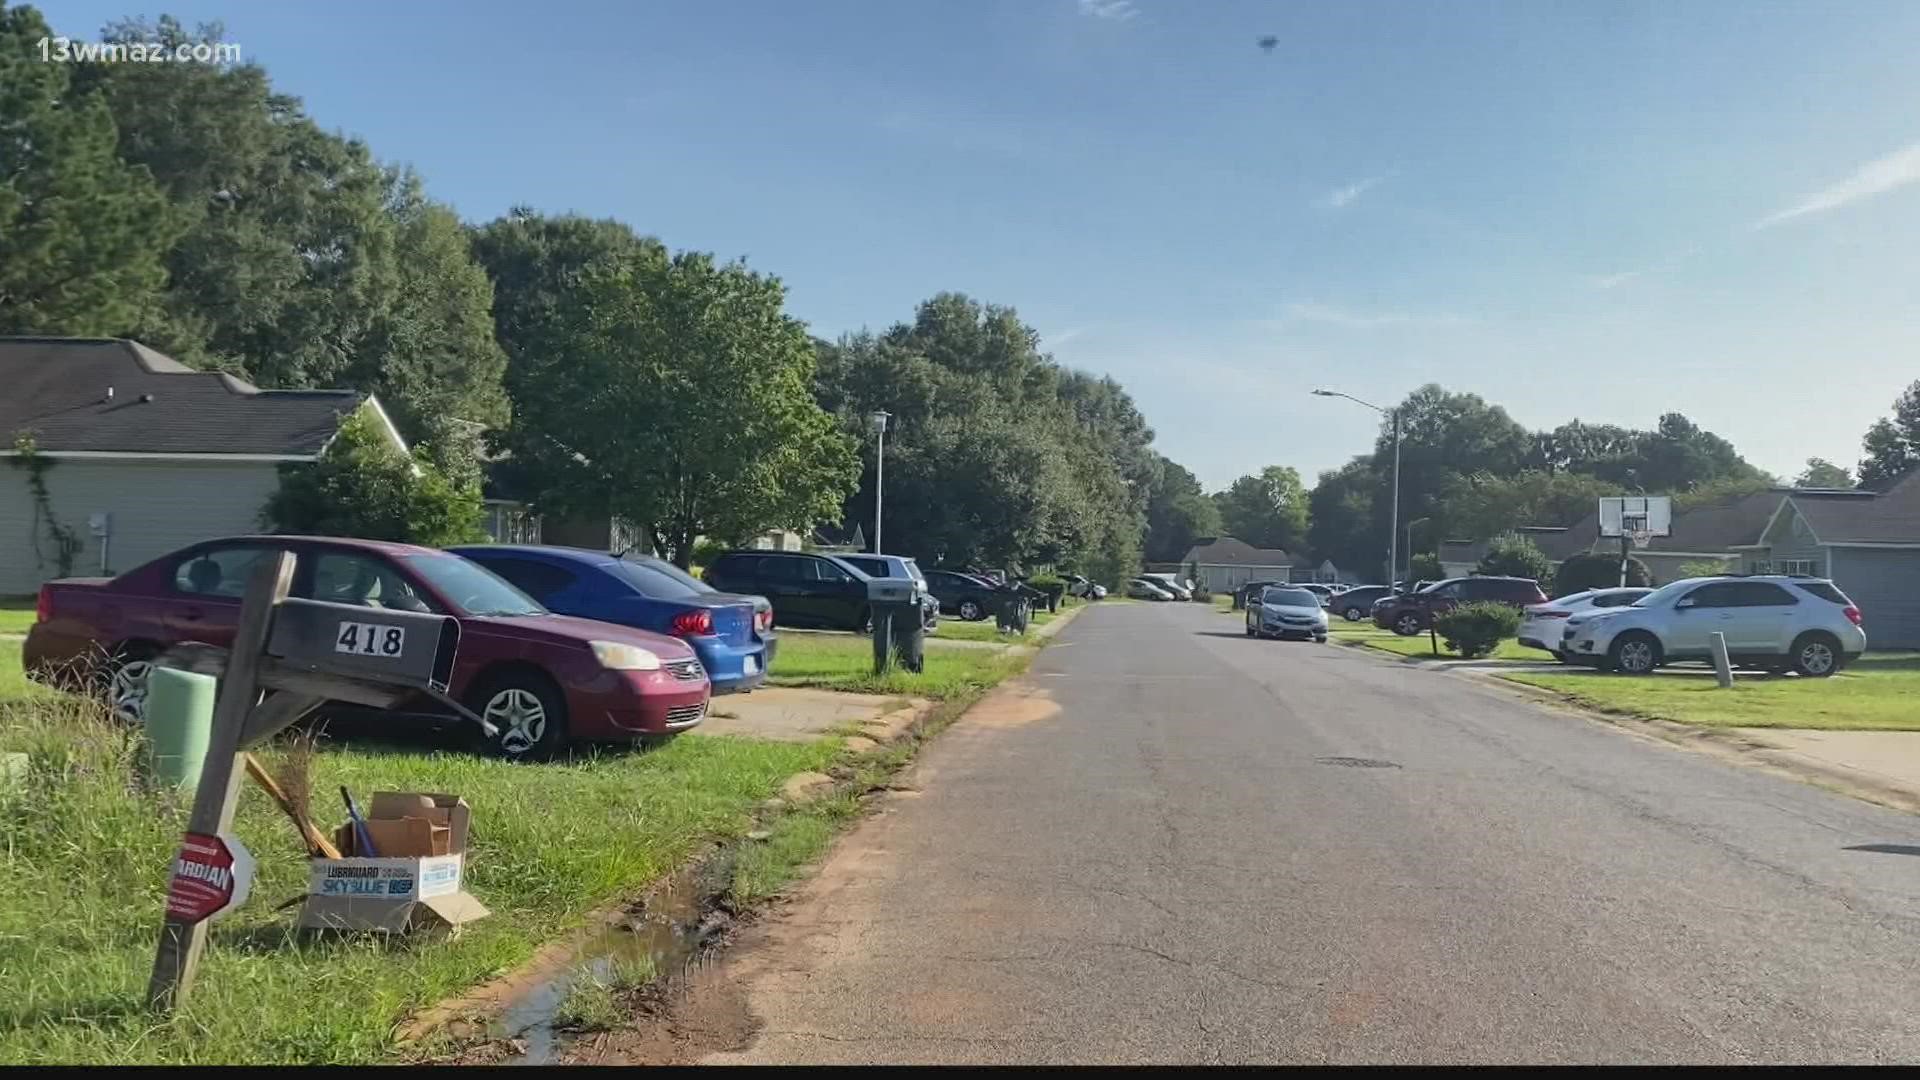 The shooting killed a 15-year-old girl from McDonough who was visiting family